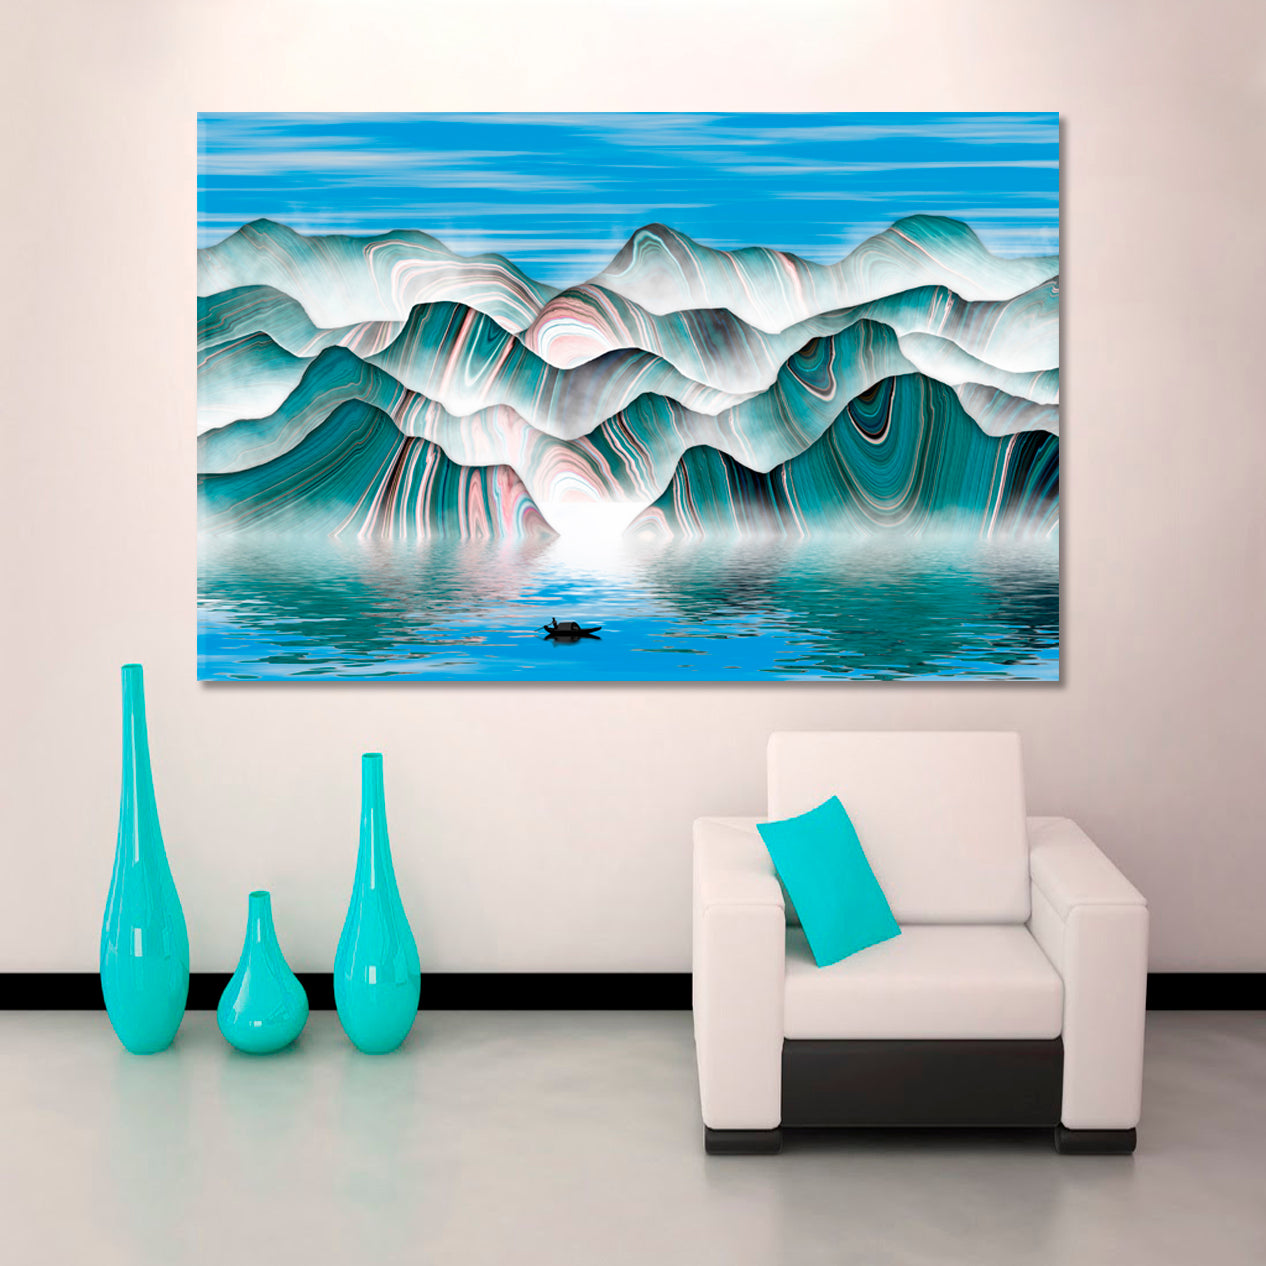 ABSTRACT LANDSCAPE Ink Painting Abstract Mountain Lines Shapes Forms Contemporary Art Artesty 1 panel 24" x 16" 